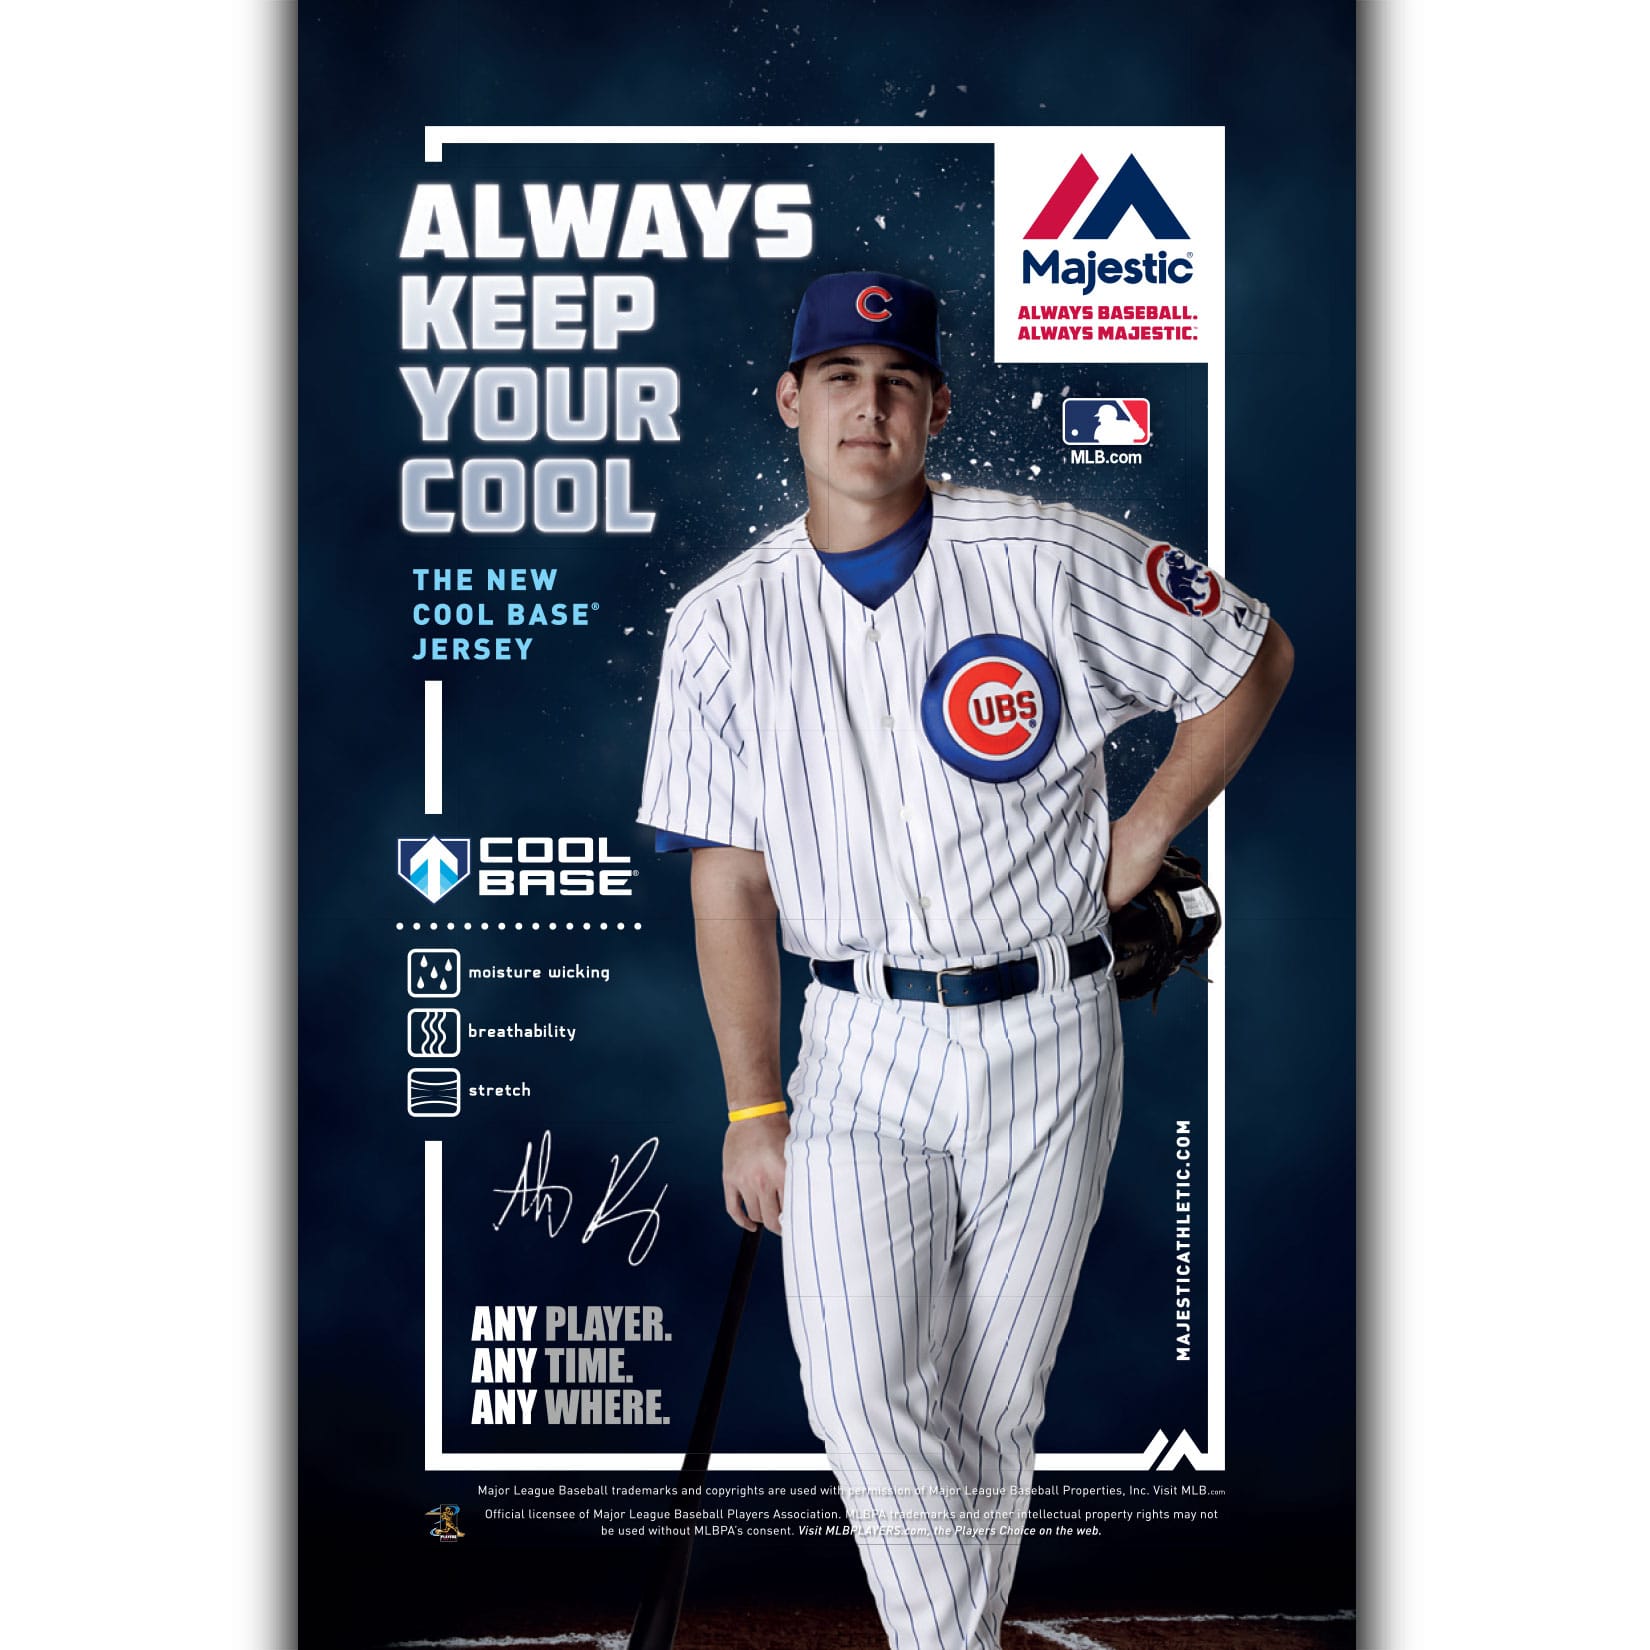 MLB & Majestic National Campaign